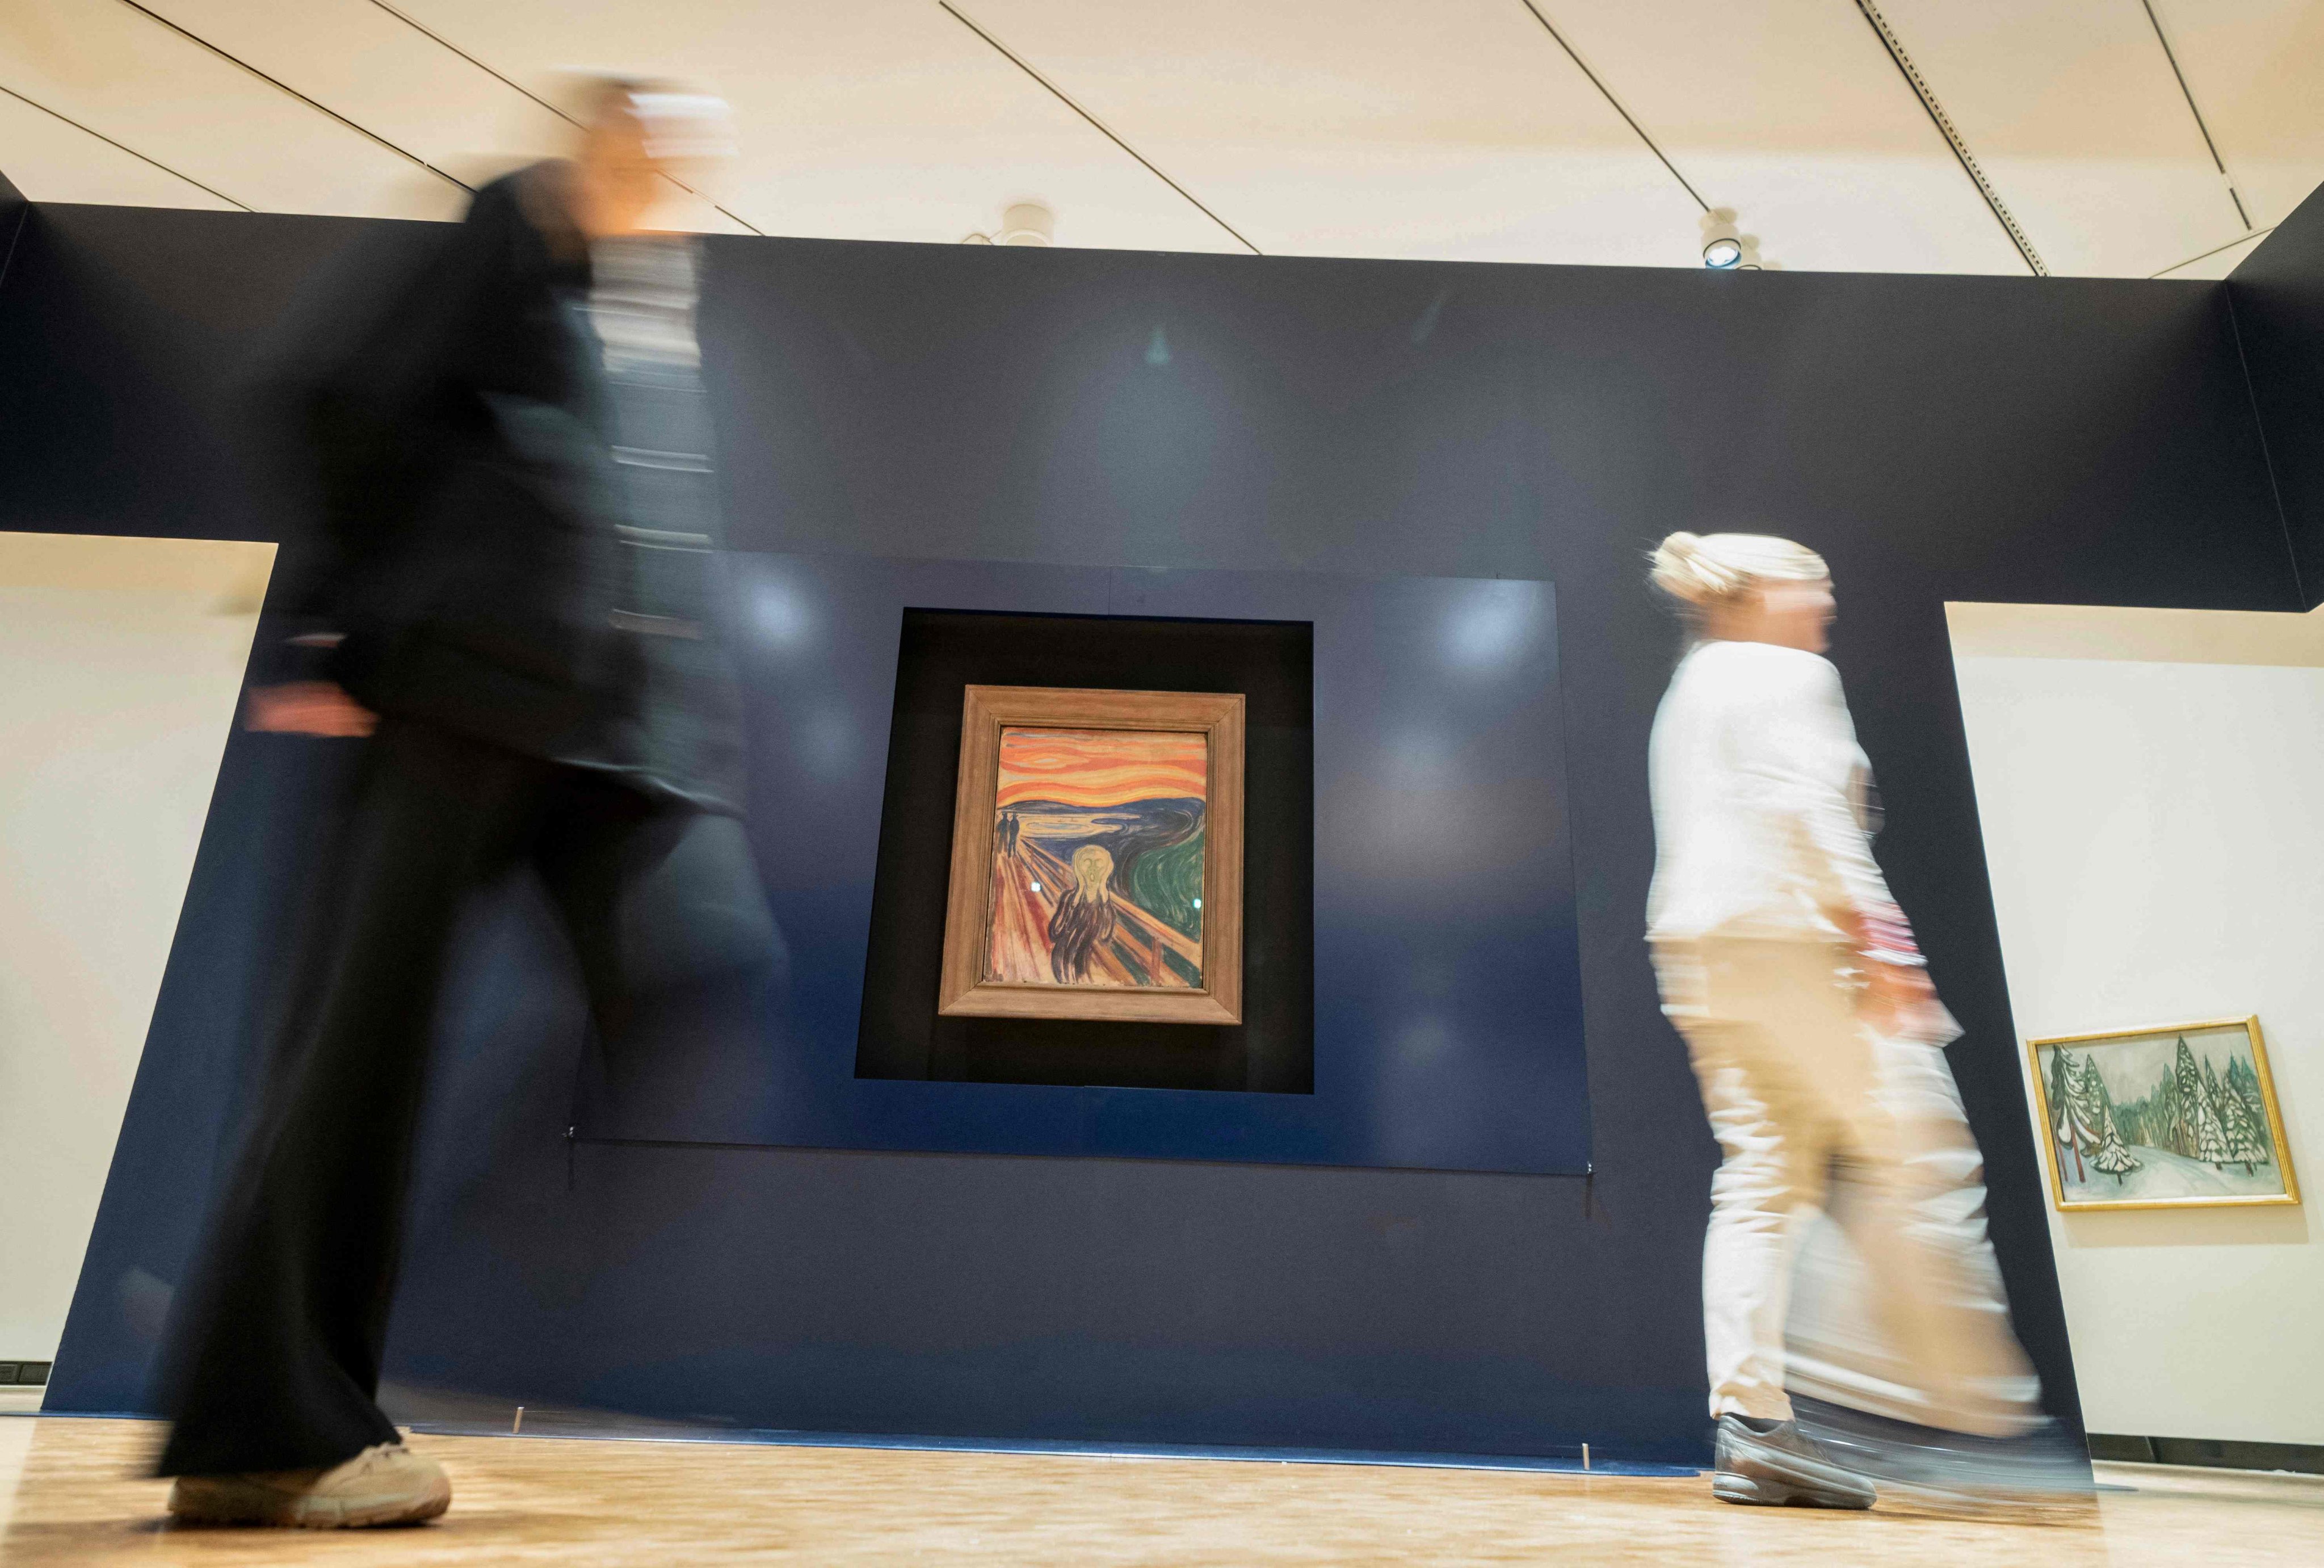 People pass by the painting “The Scream” by Norwegian artist Edvard Munch in the new Munch Museum in Oslo. Three versions of the  famous work are on show. Photo: Terje Pedersen/NTB/AFP